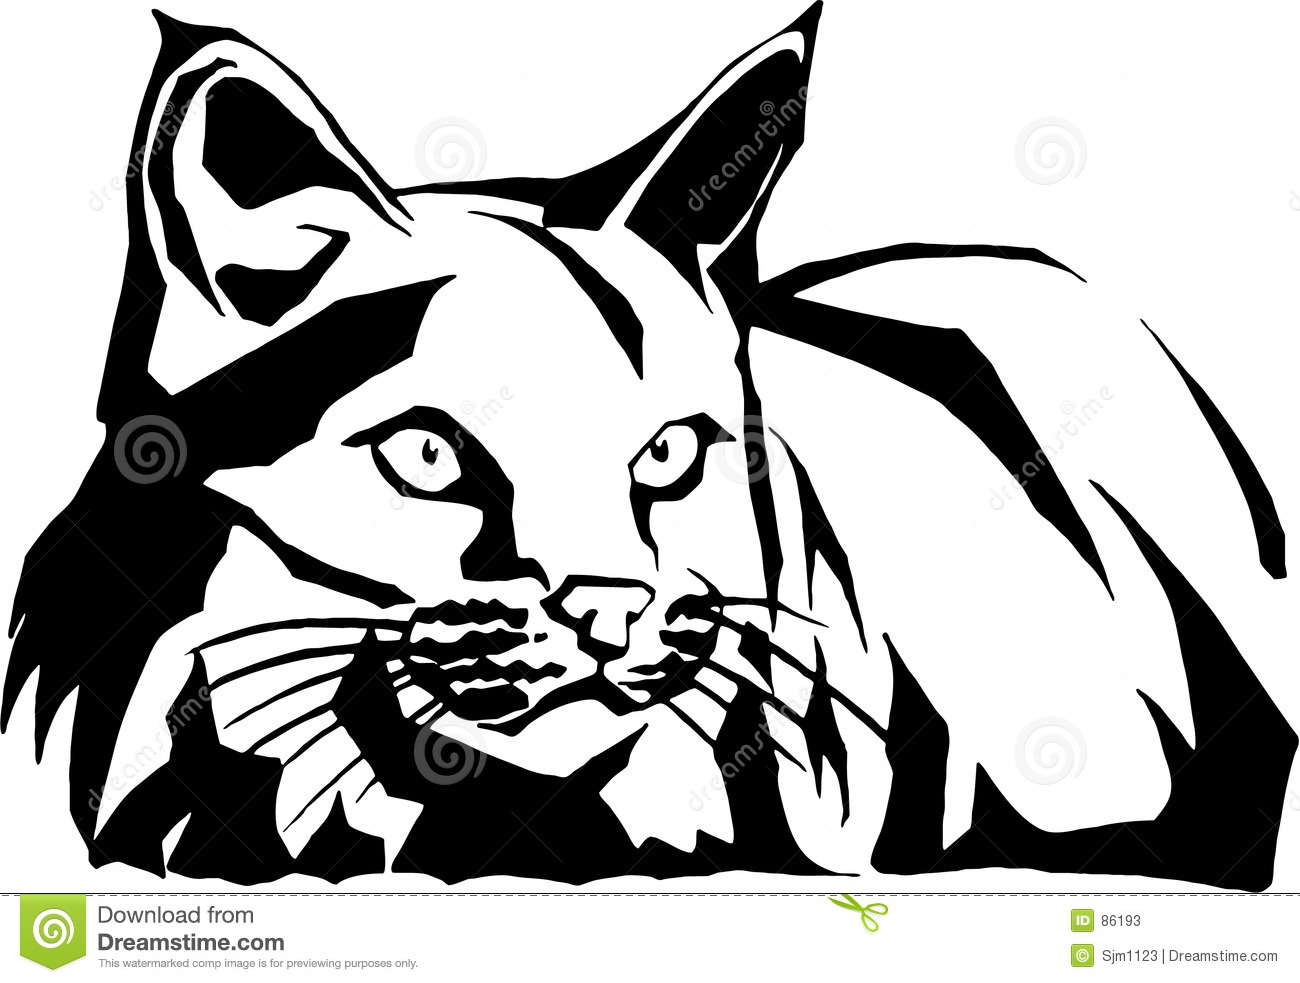 Results For Wildcat Clipart Illustrations And Clip Art 97 Wildcat